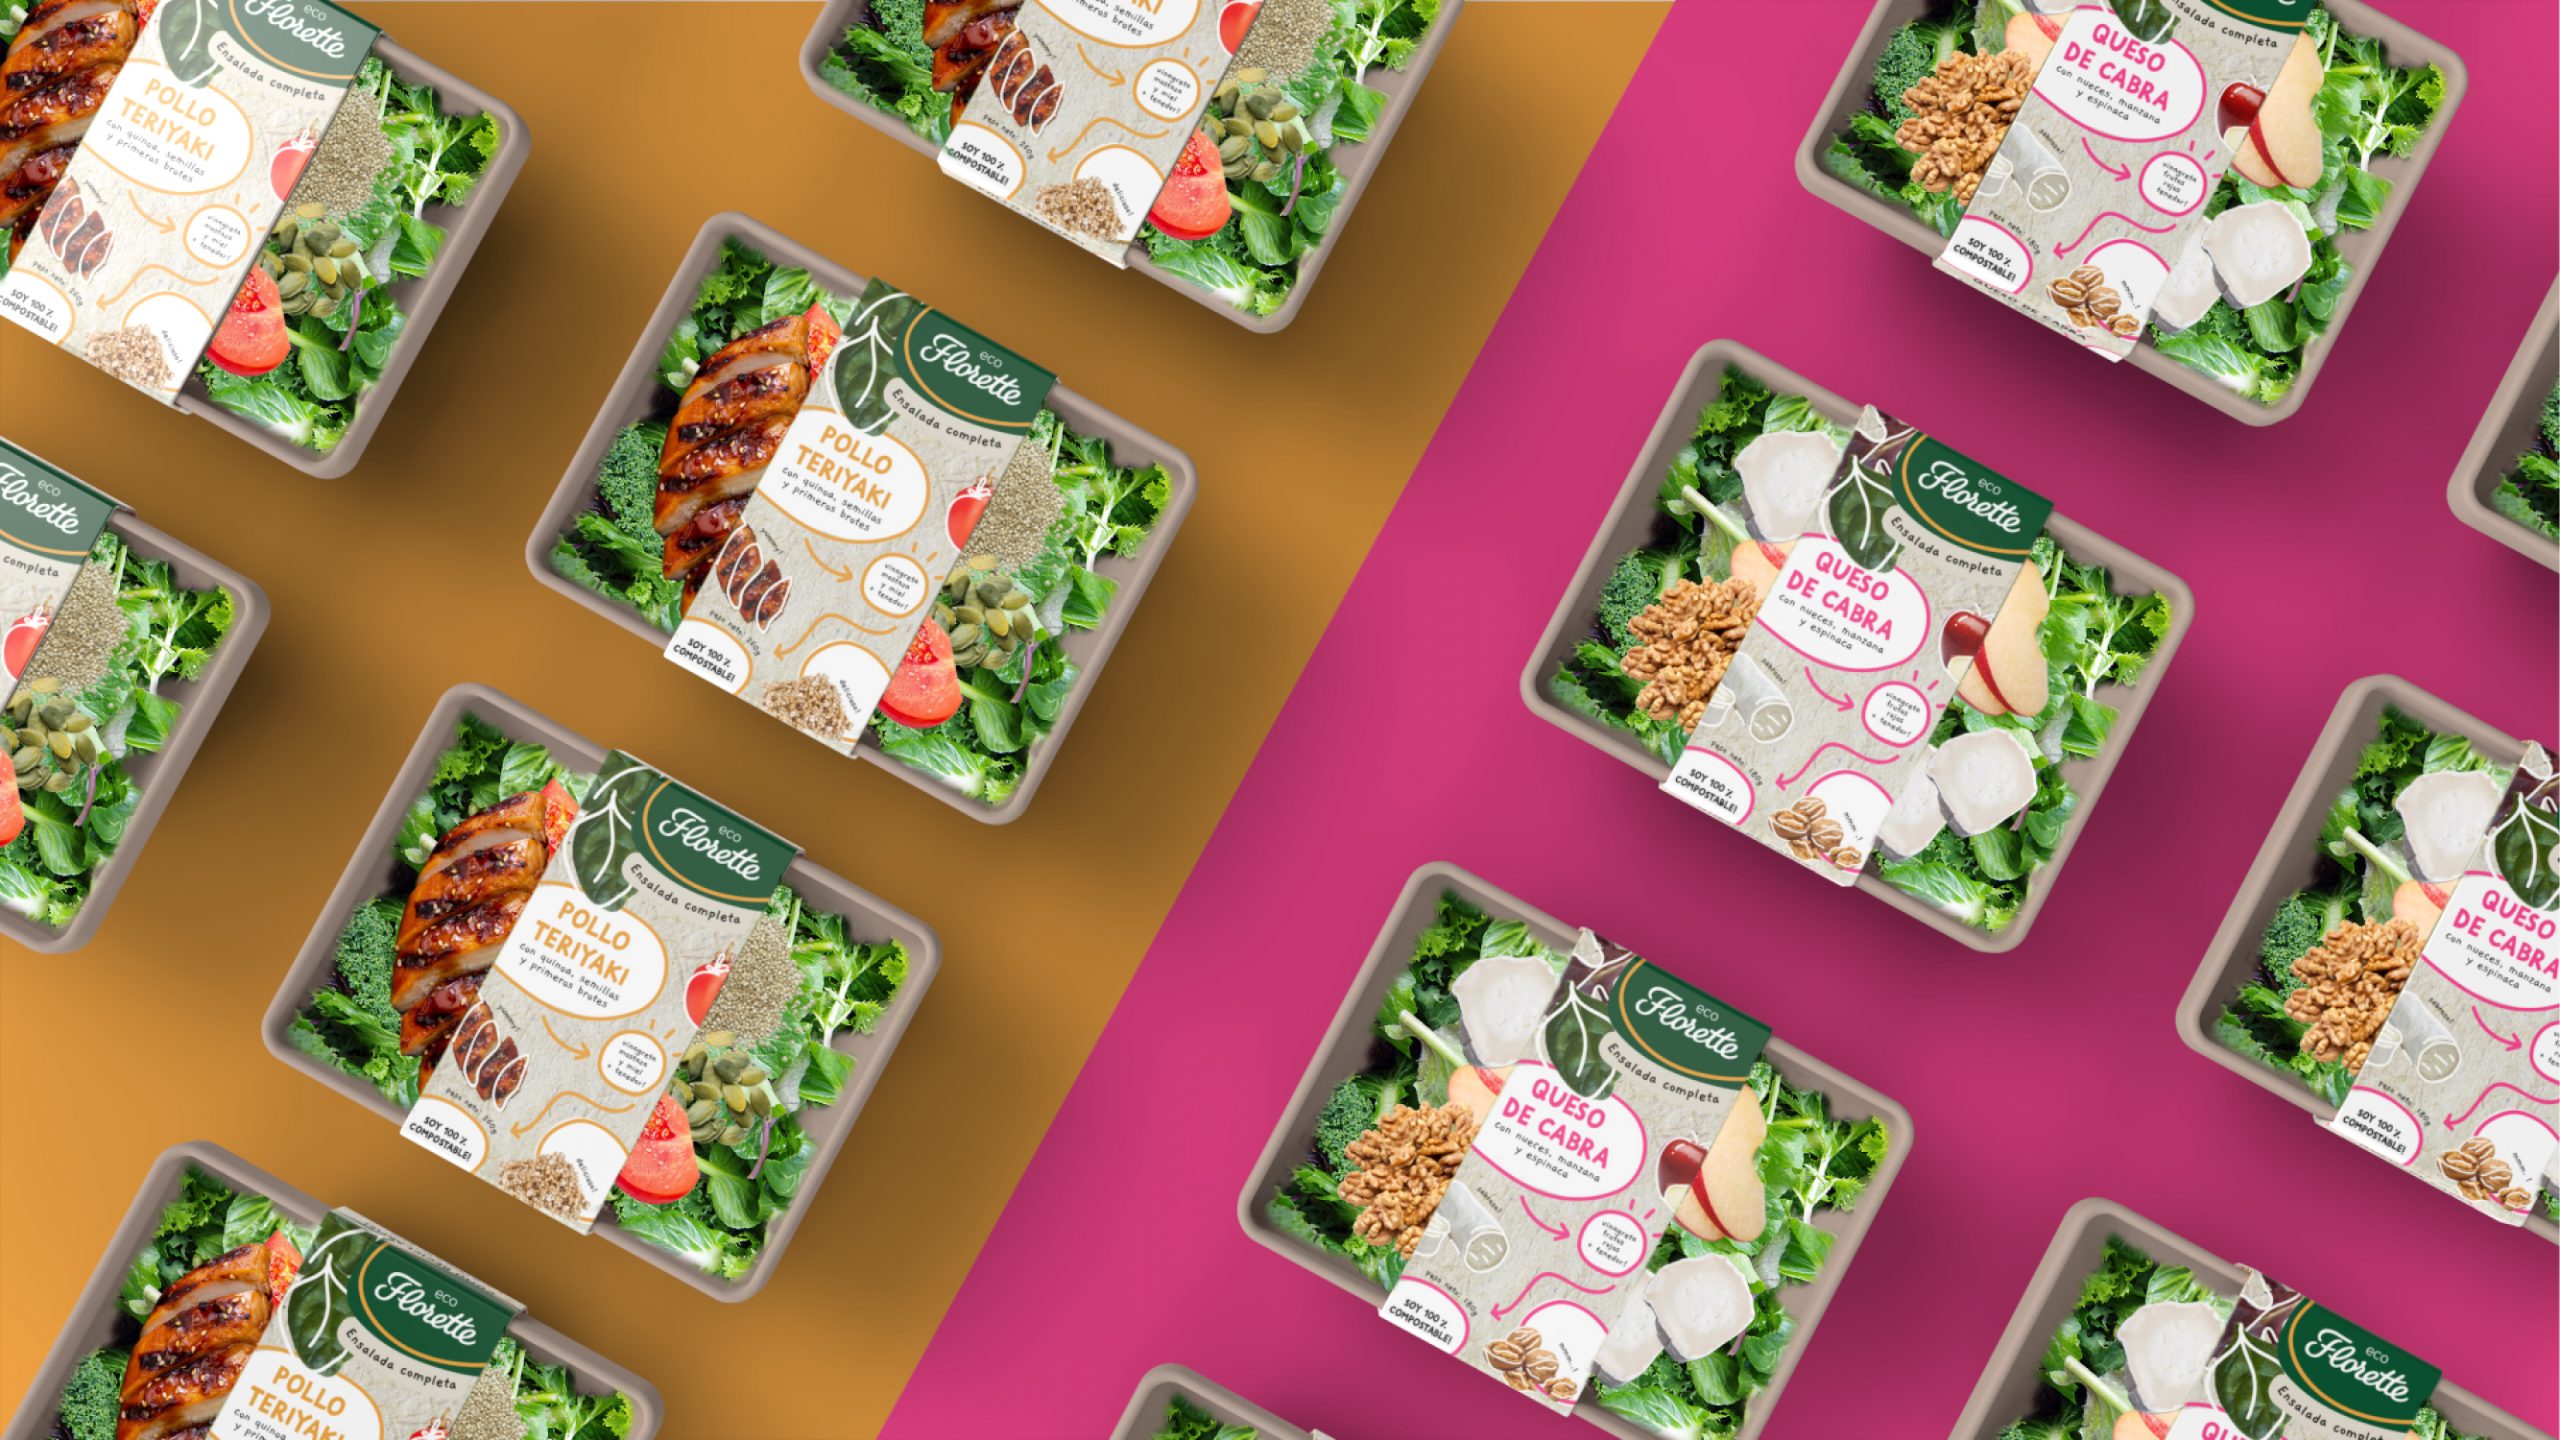 Pink and yellow background with some ready-to-eat salads for Florette in their packaging design